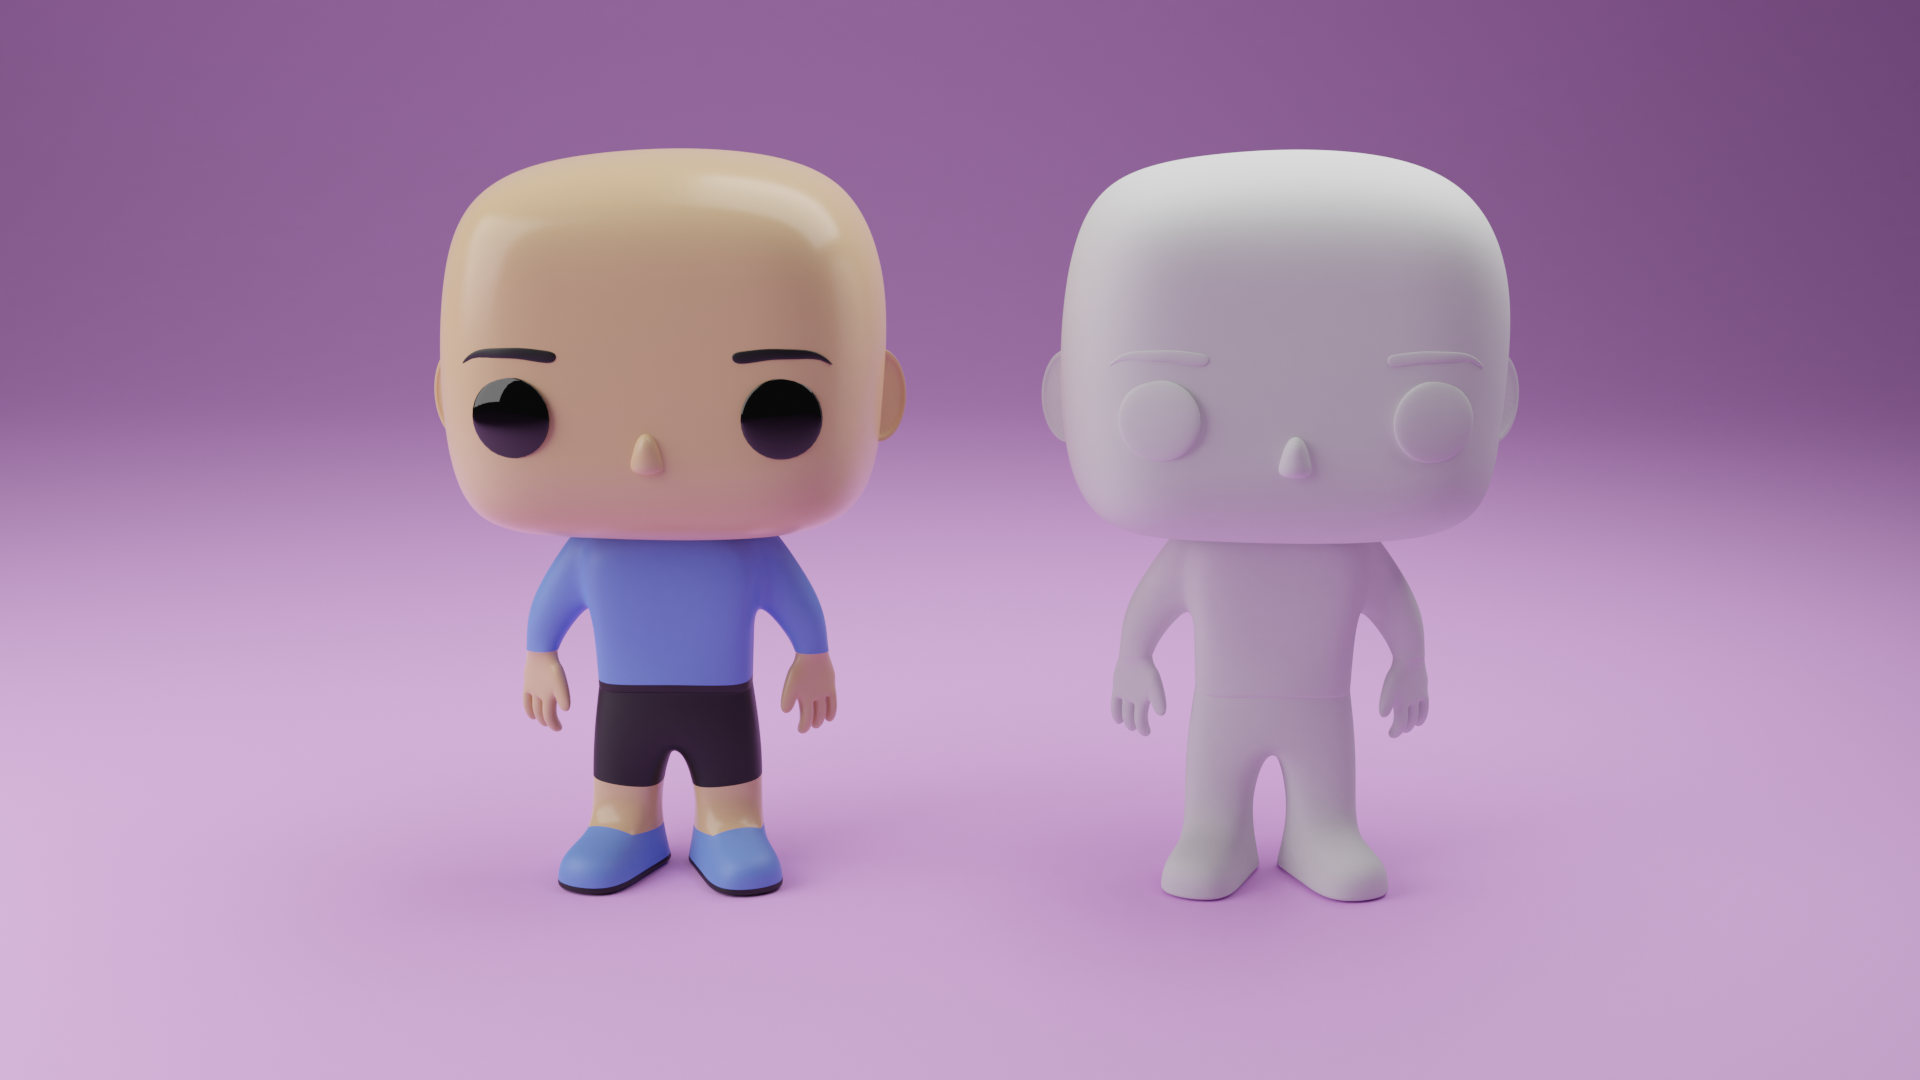 Male Funko Pop with Blonde Hair - wide 2